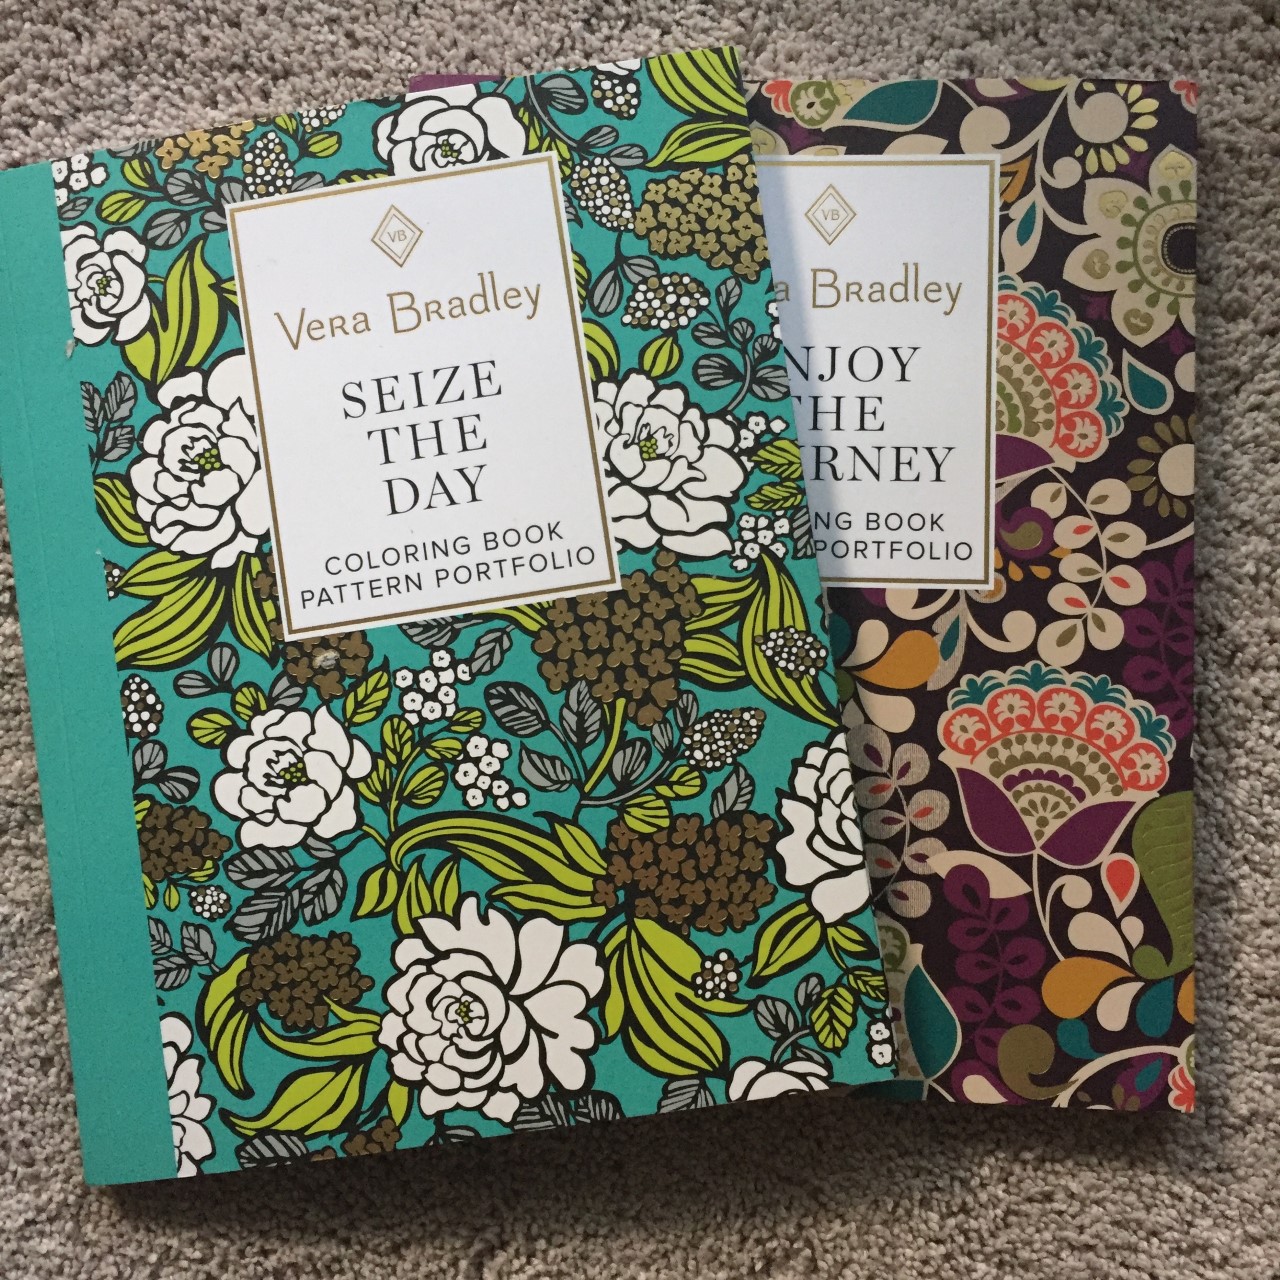 Spry On The Wall Book Review Vera Bradley Coloring Books Round 2